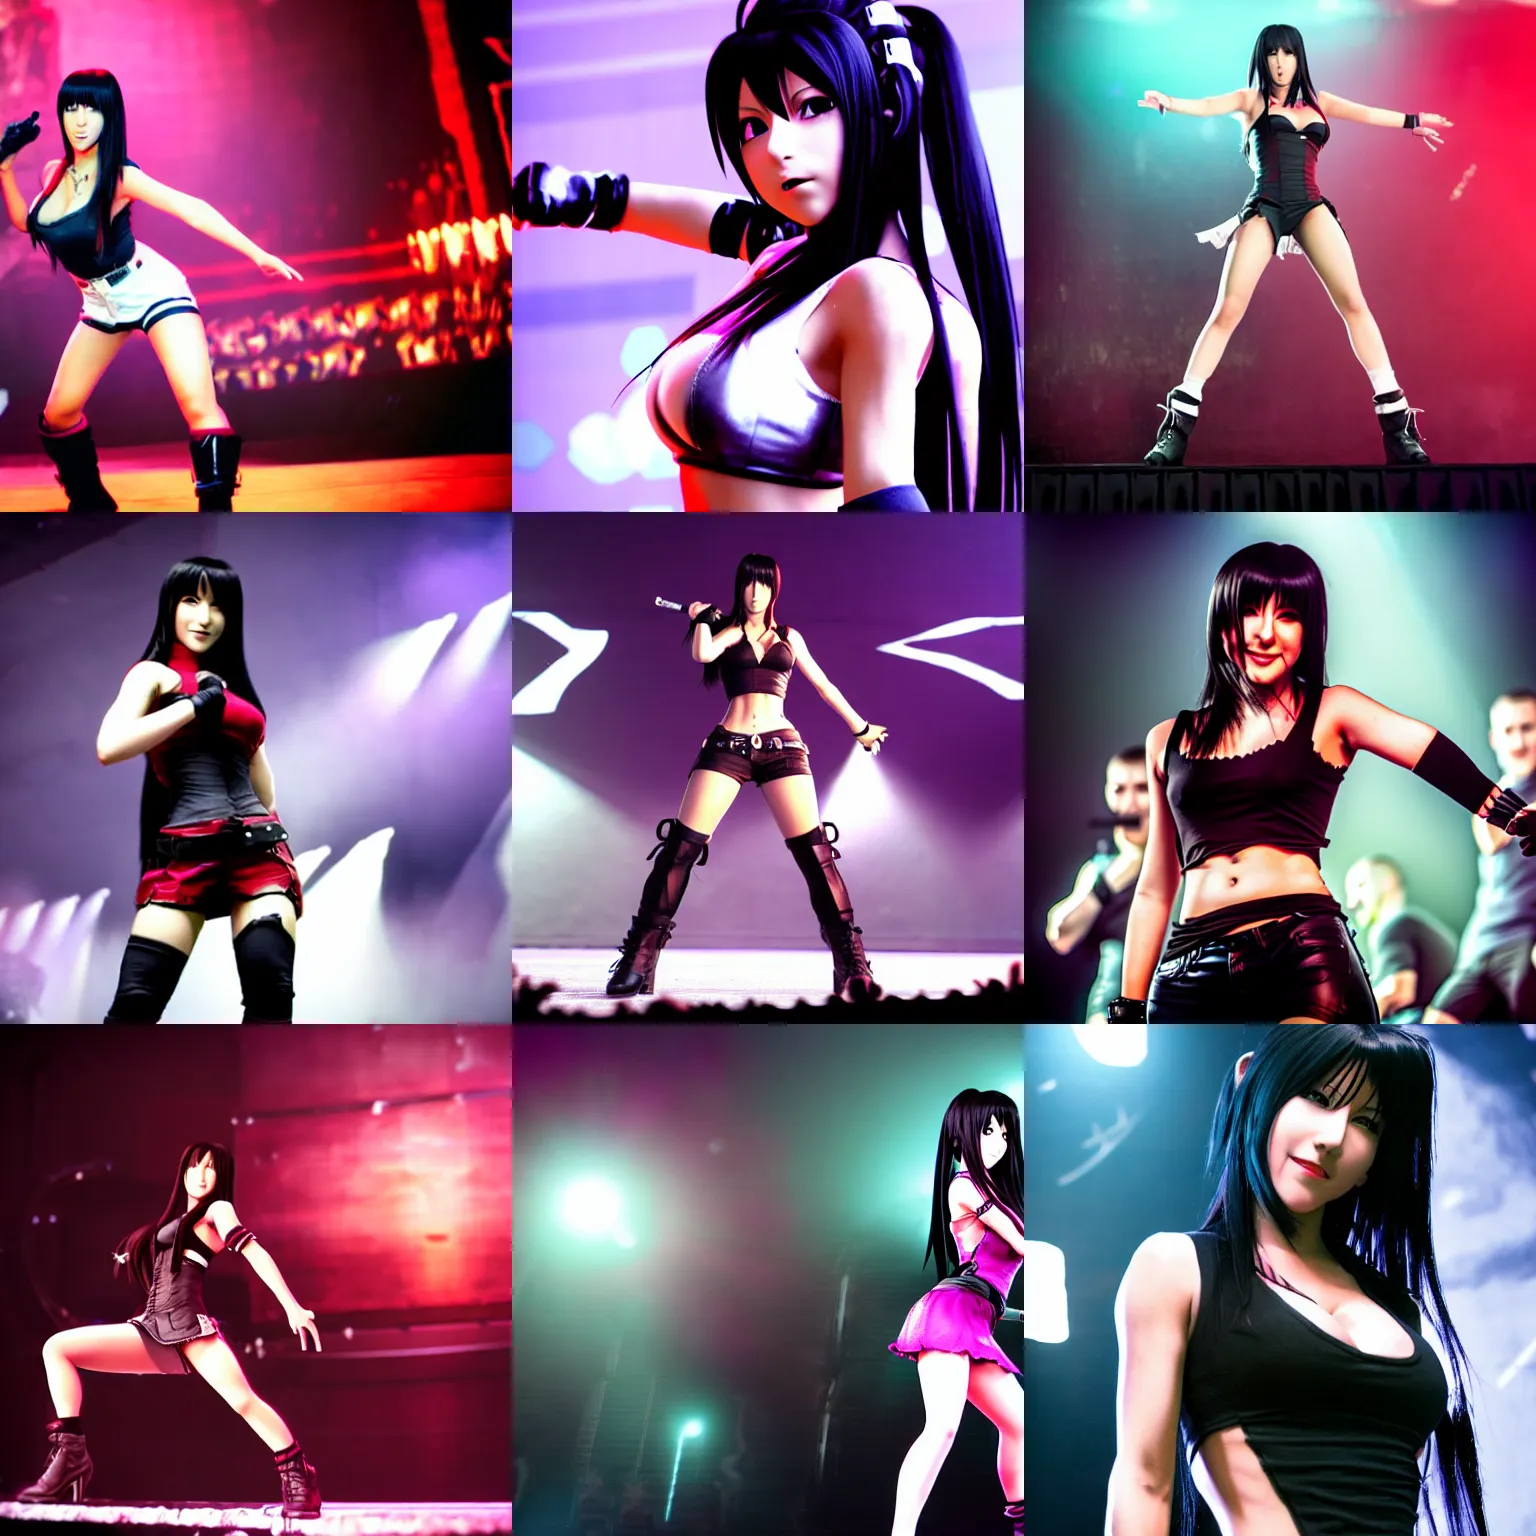 Prompt: photo of Tifa from Final Fantasy performing on stage